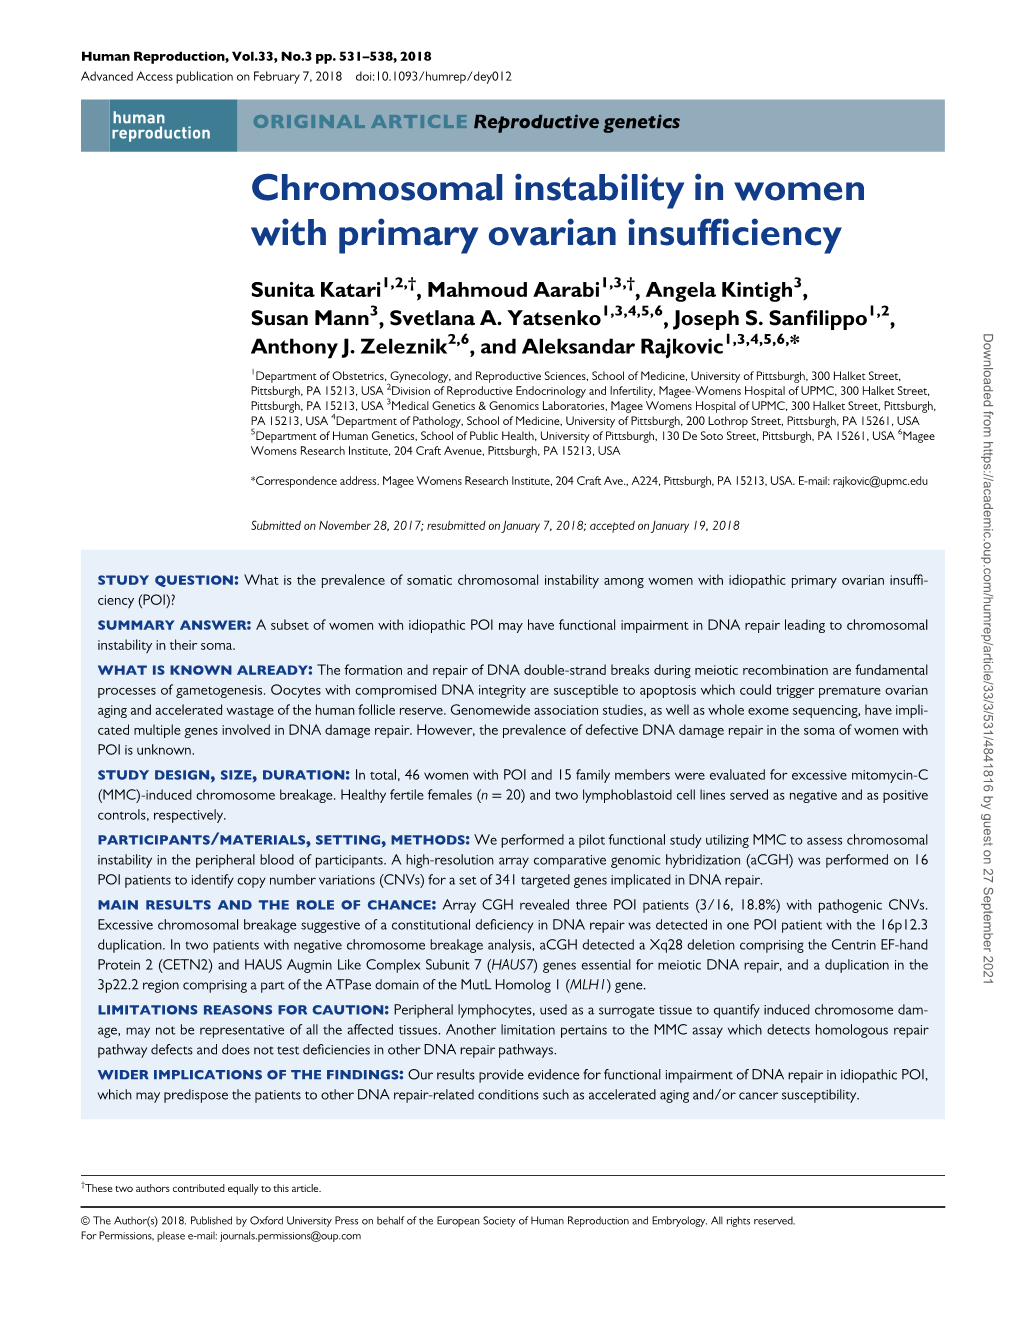 Chromosomal Instability in Women with Primary Ovarian Insufficiency